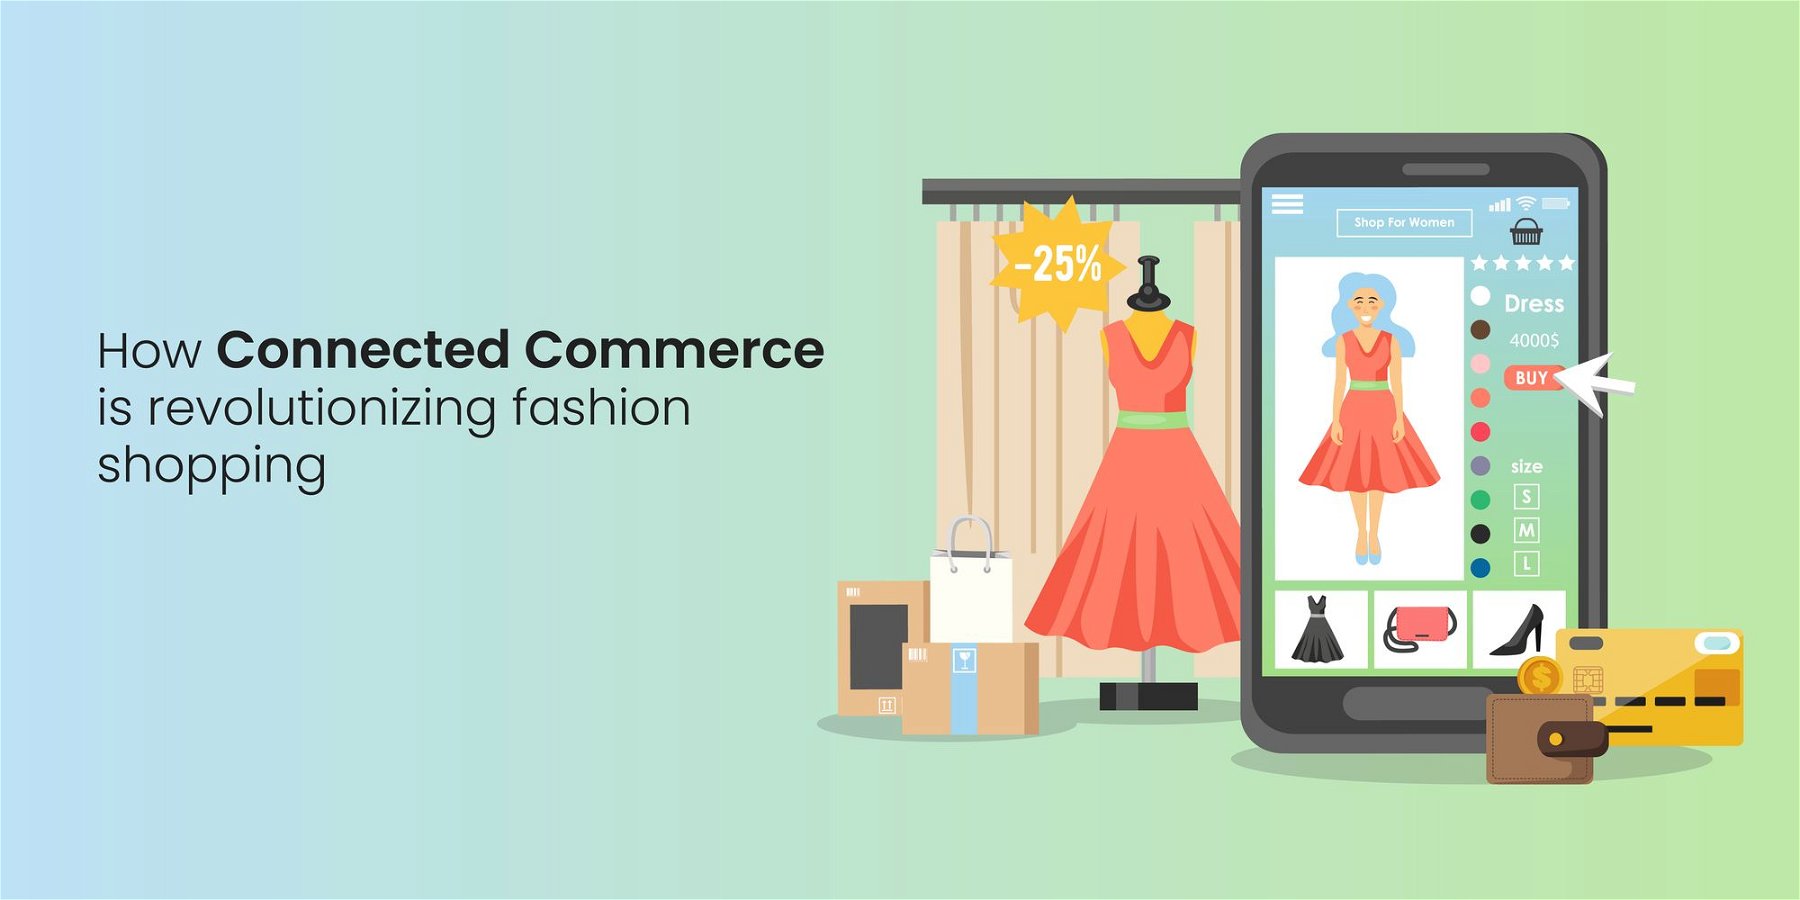 How connected commerce is revolutionizing fashion shopping